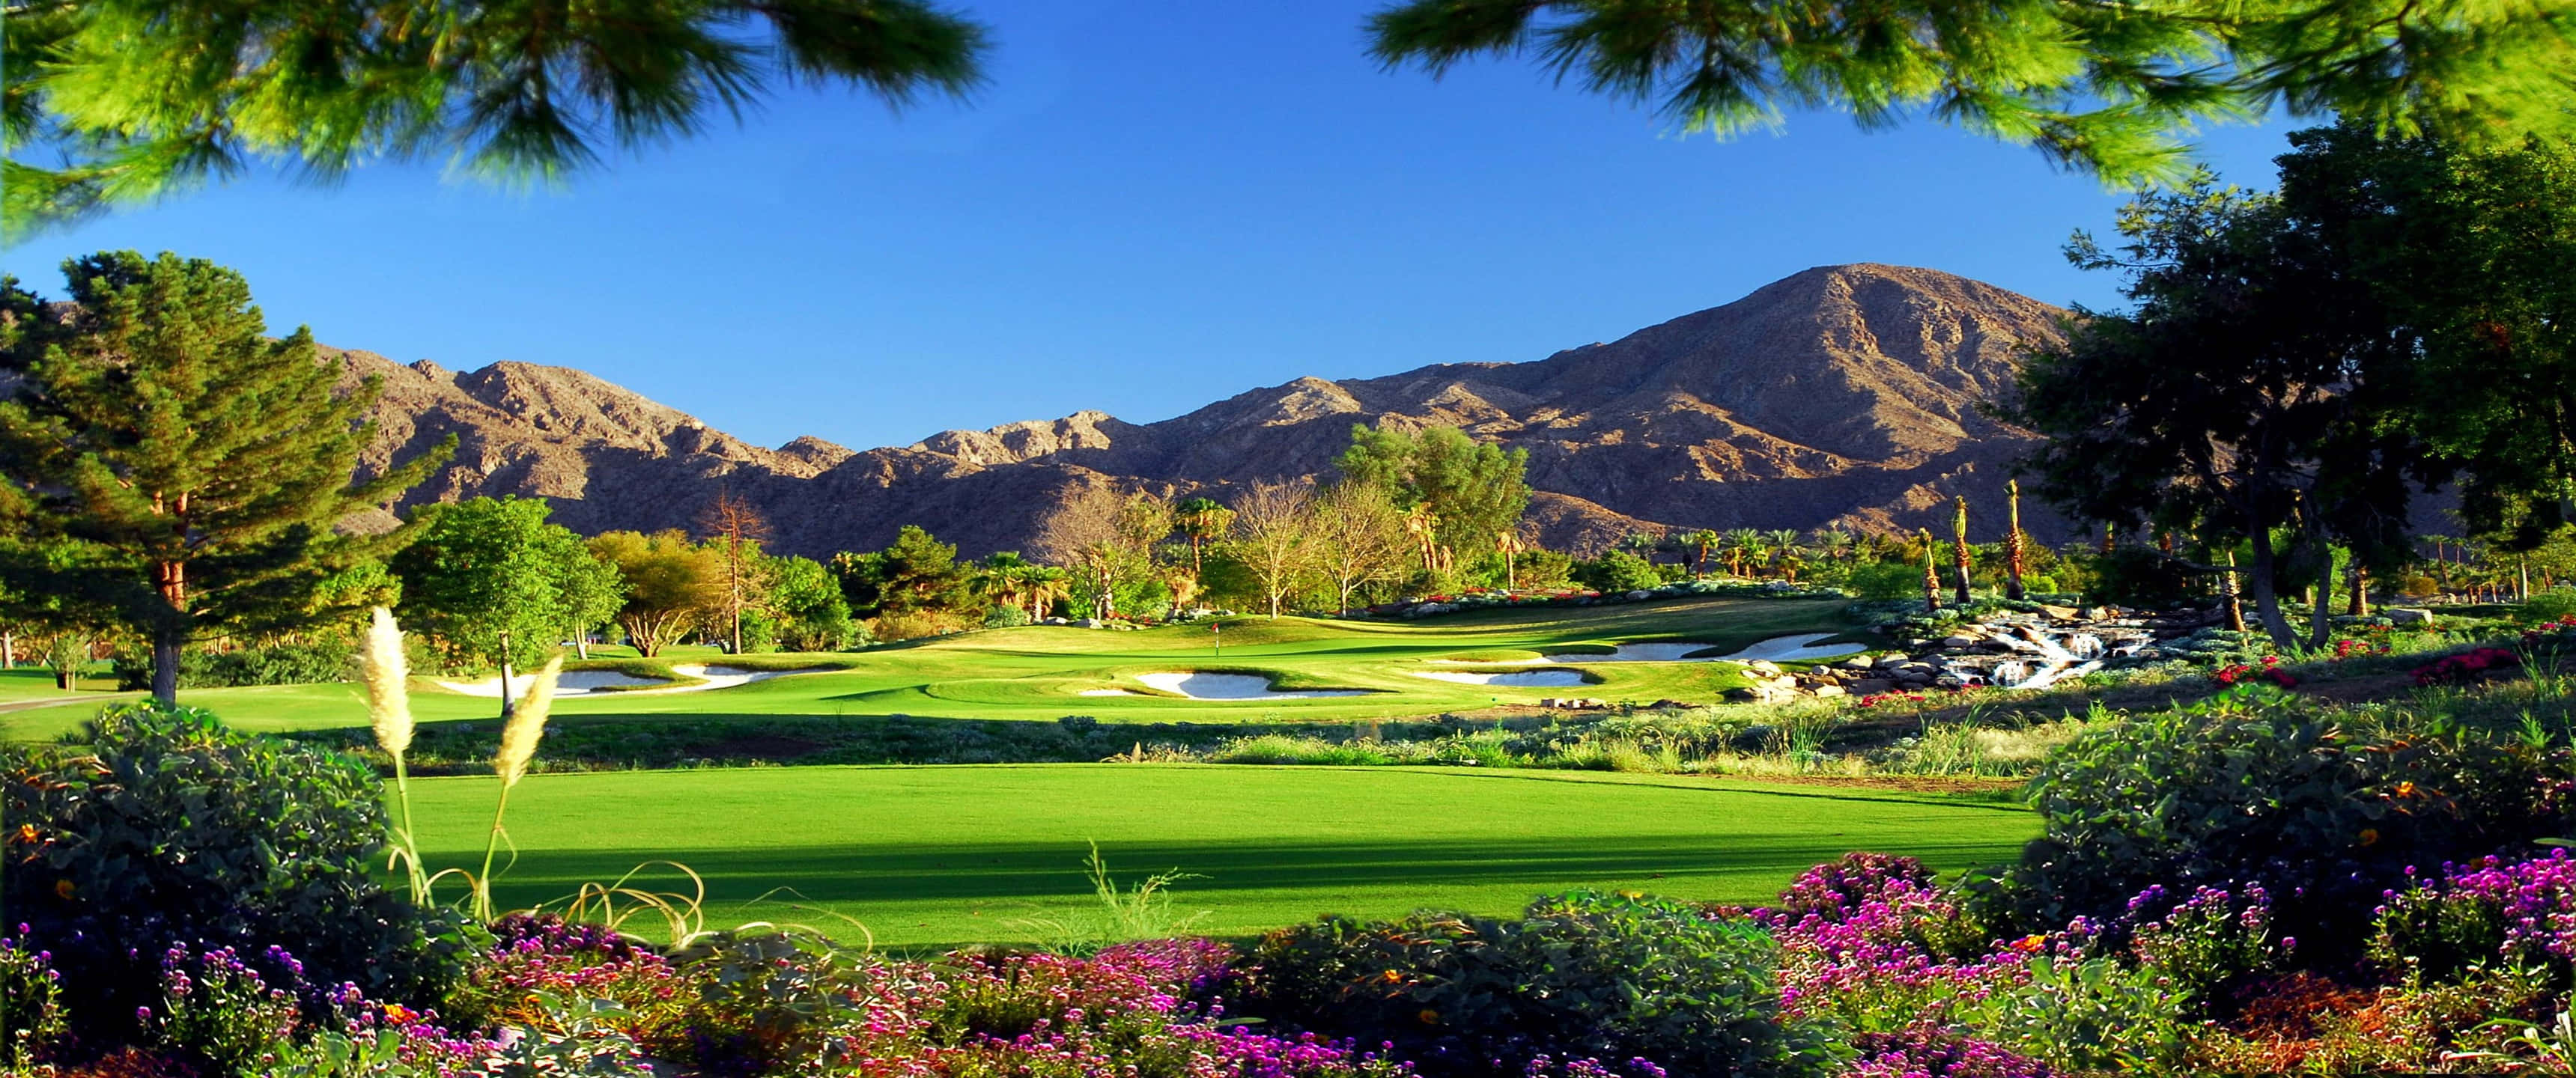 Indian Wells 3440x1440p Golf Course Background